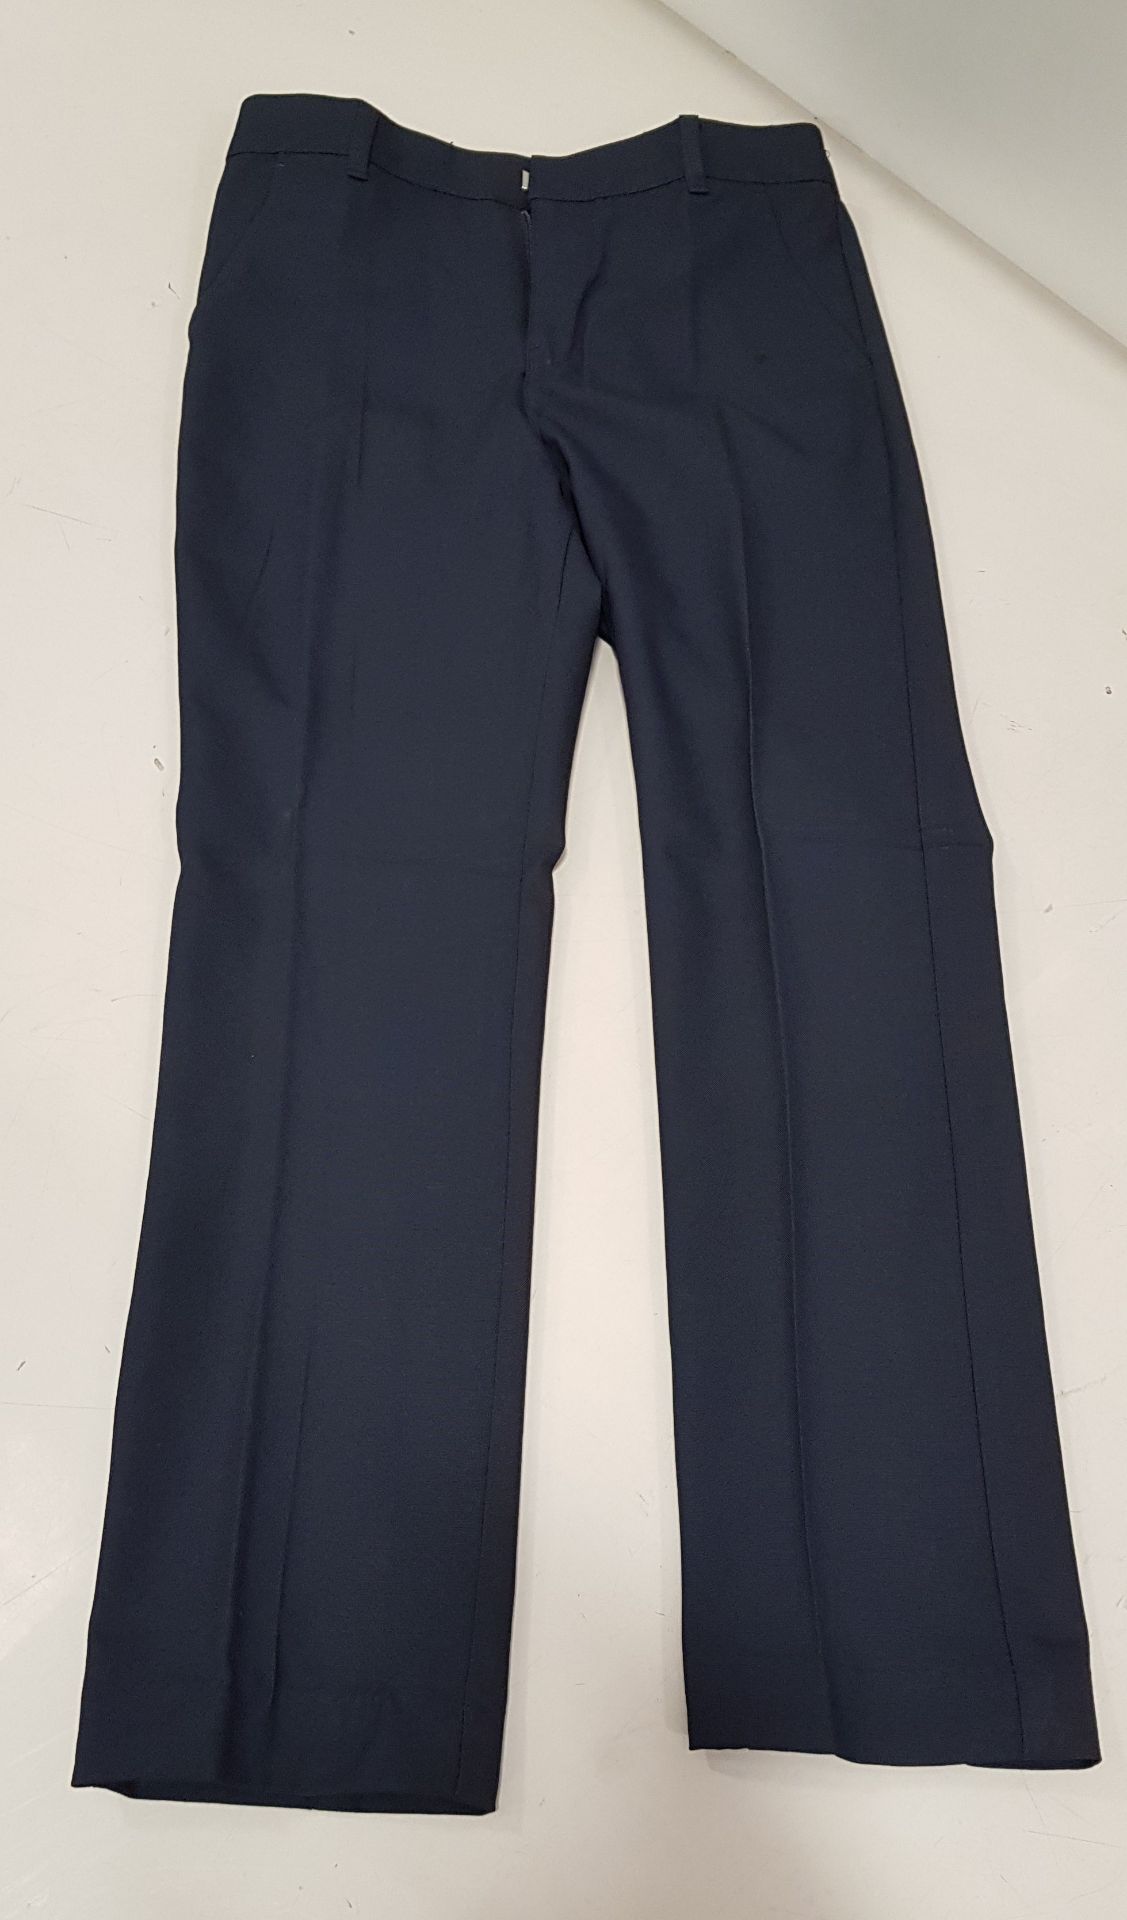 60 X BRAND NEW F&F PACKS OF 2 SLIM FIT BOYS TROUSERS IN NAVY ALL IN SIZES 9-10 YRS ( RRP £9.00 -